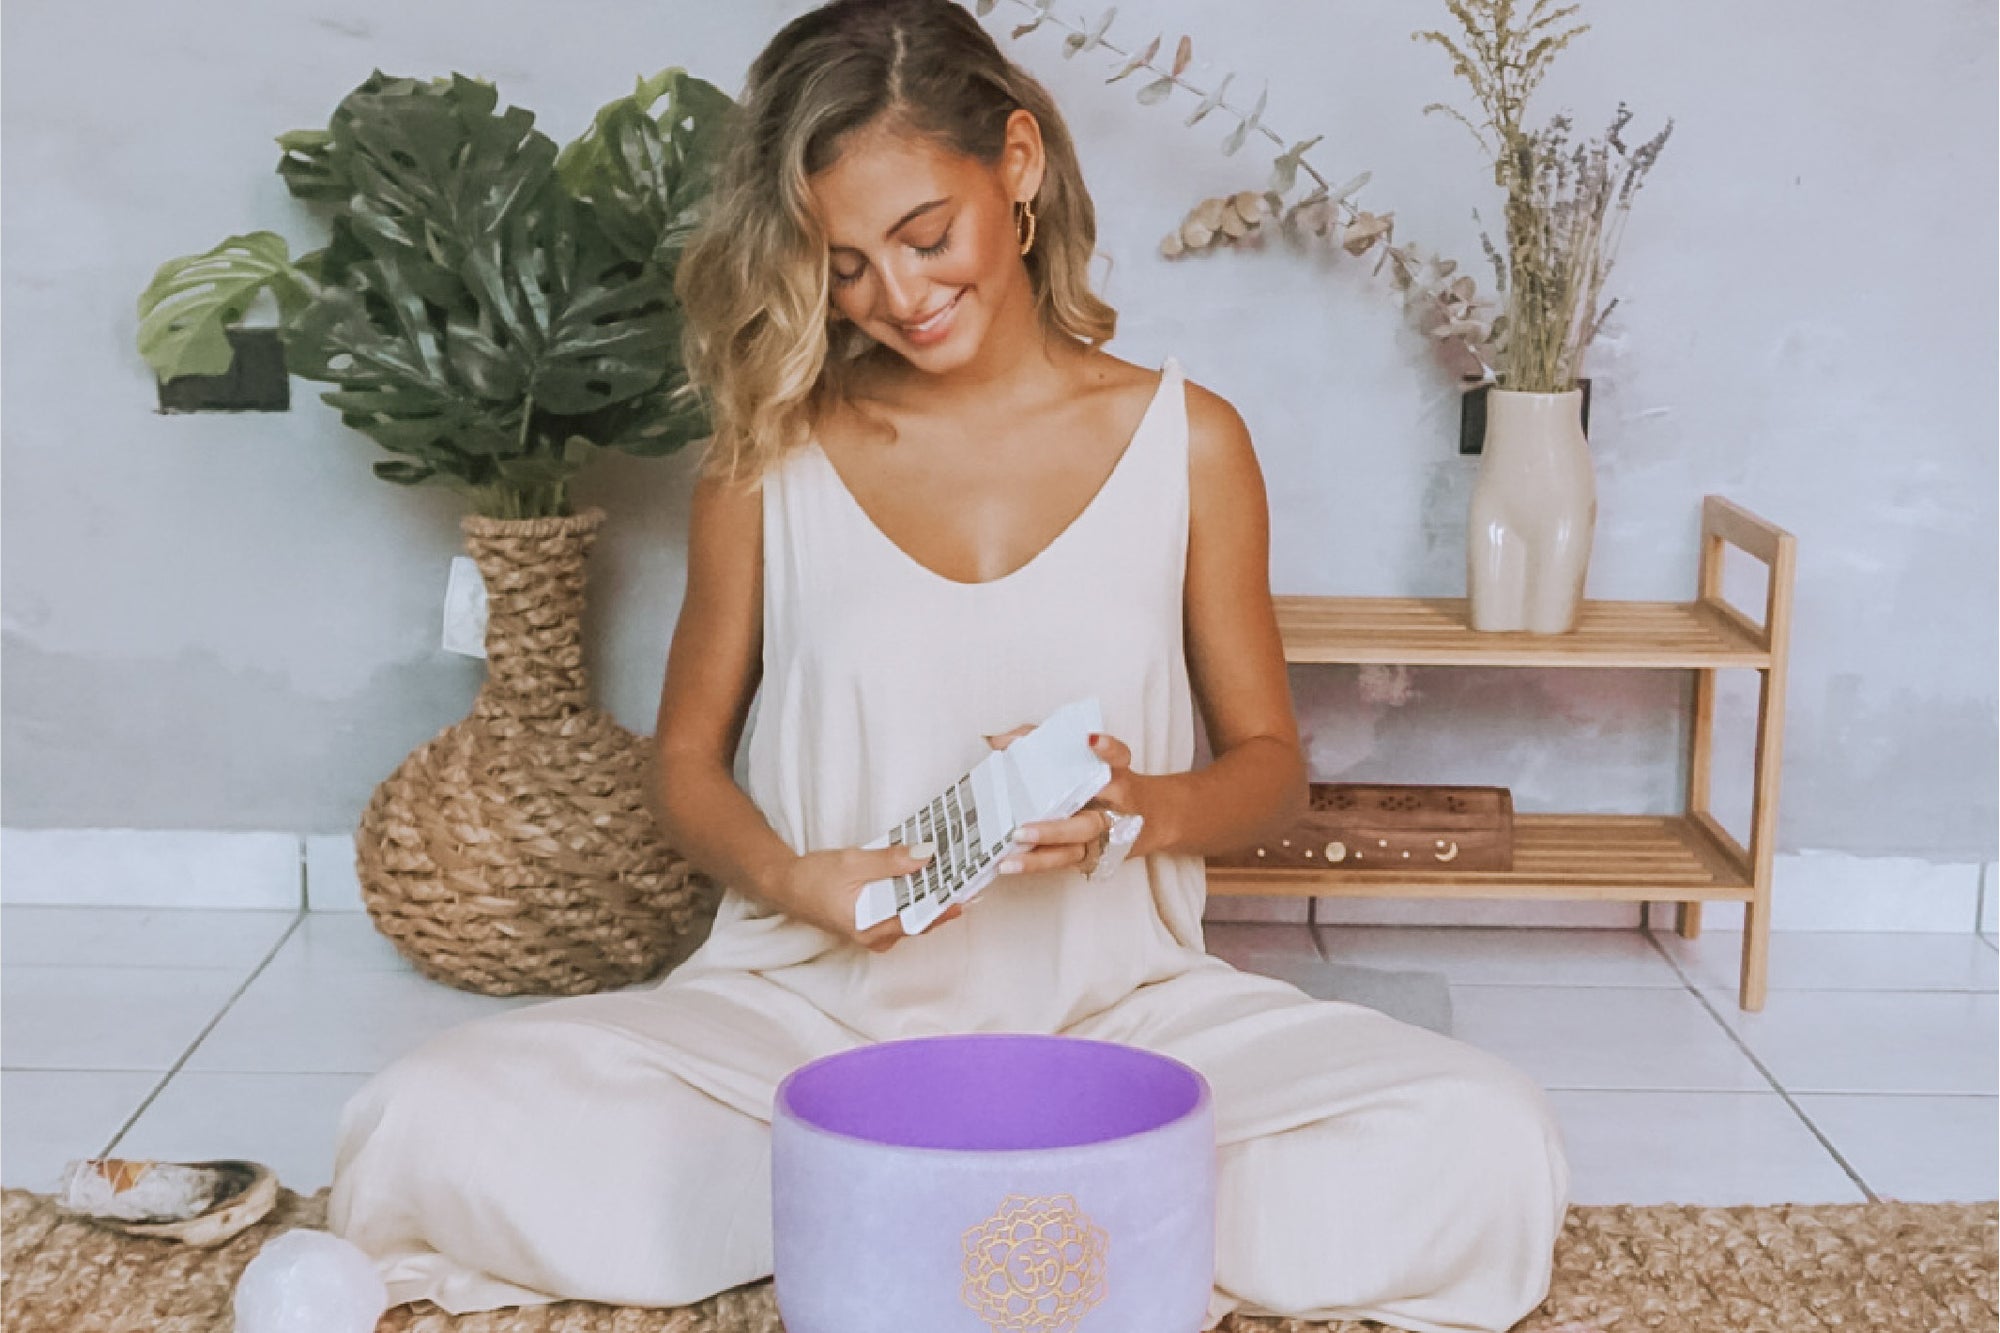 Picture of Amanda Antonella meditating with crystals and a singing bowl